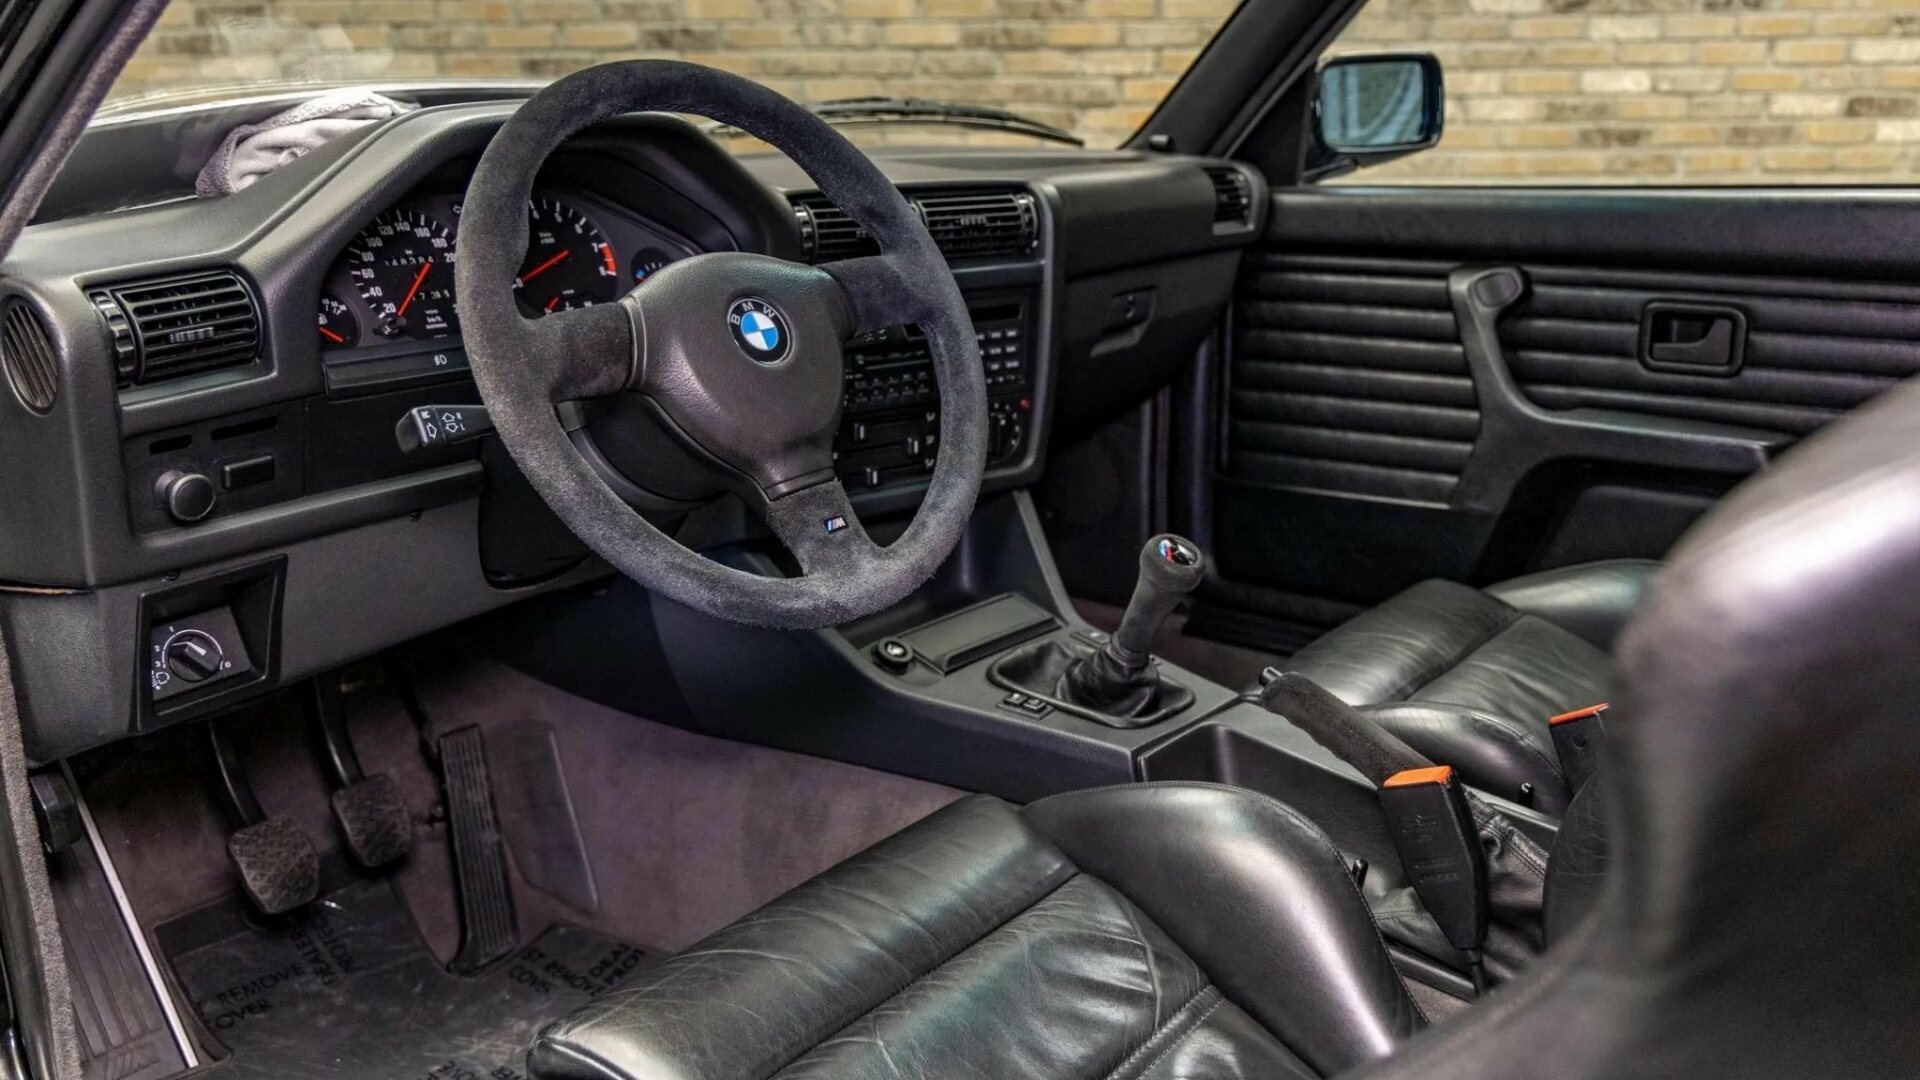 The Interior, Steering Wheel, And Dashboard Of A BMW M3 Sport Evolution (Credits Bring a Trailer)